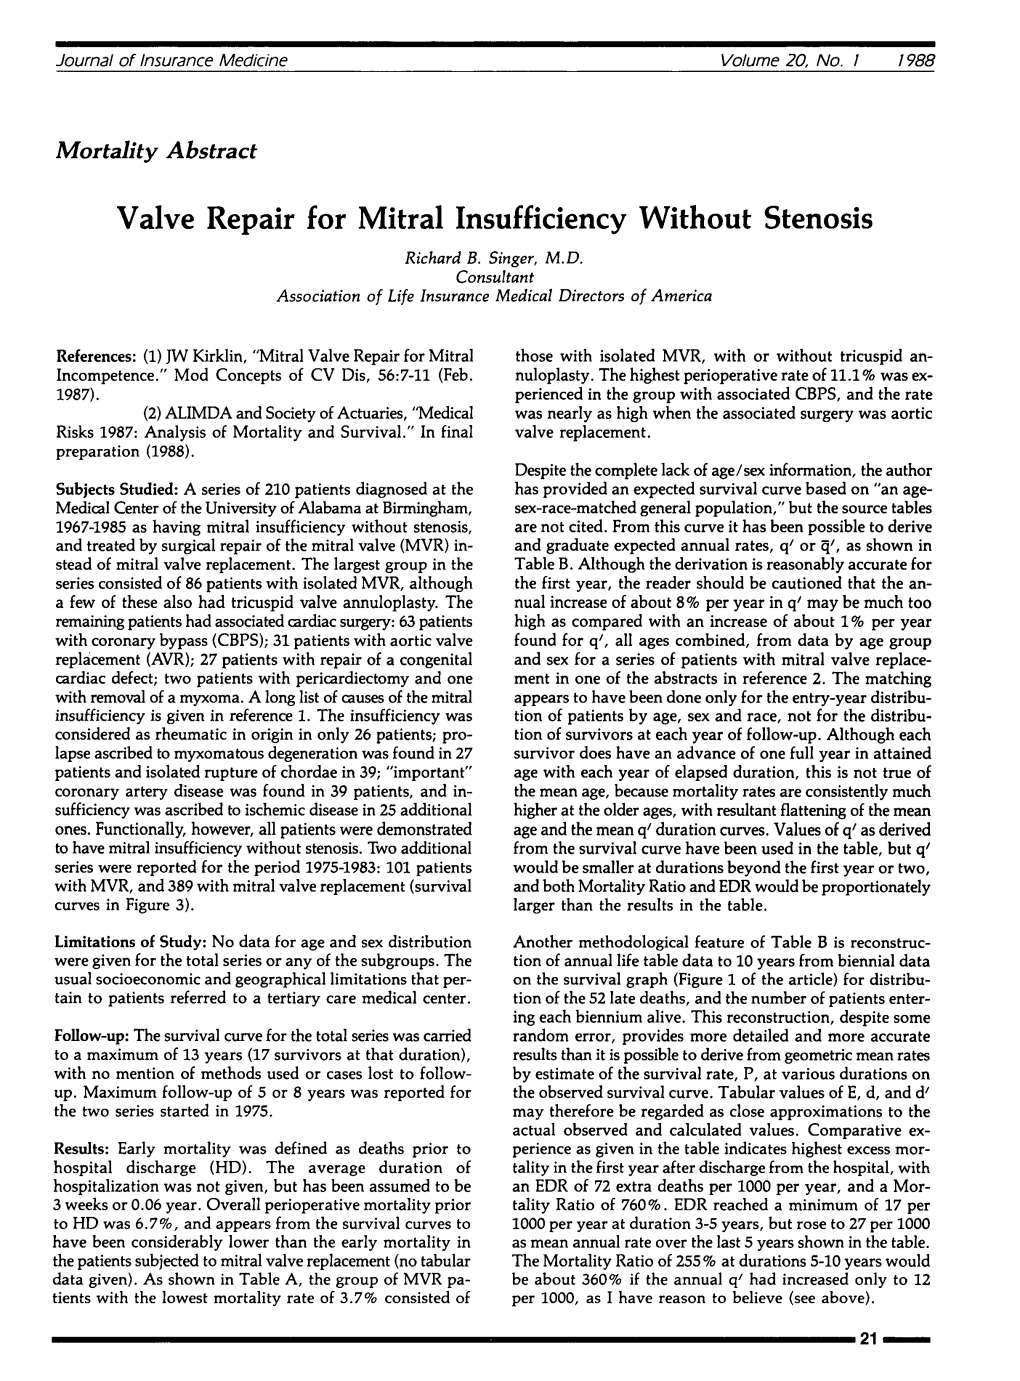 Valve Repair for Mitral Insufficiency Without Stenosis Richard B